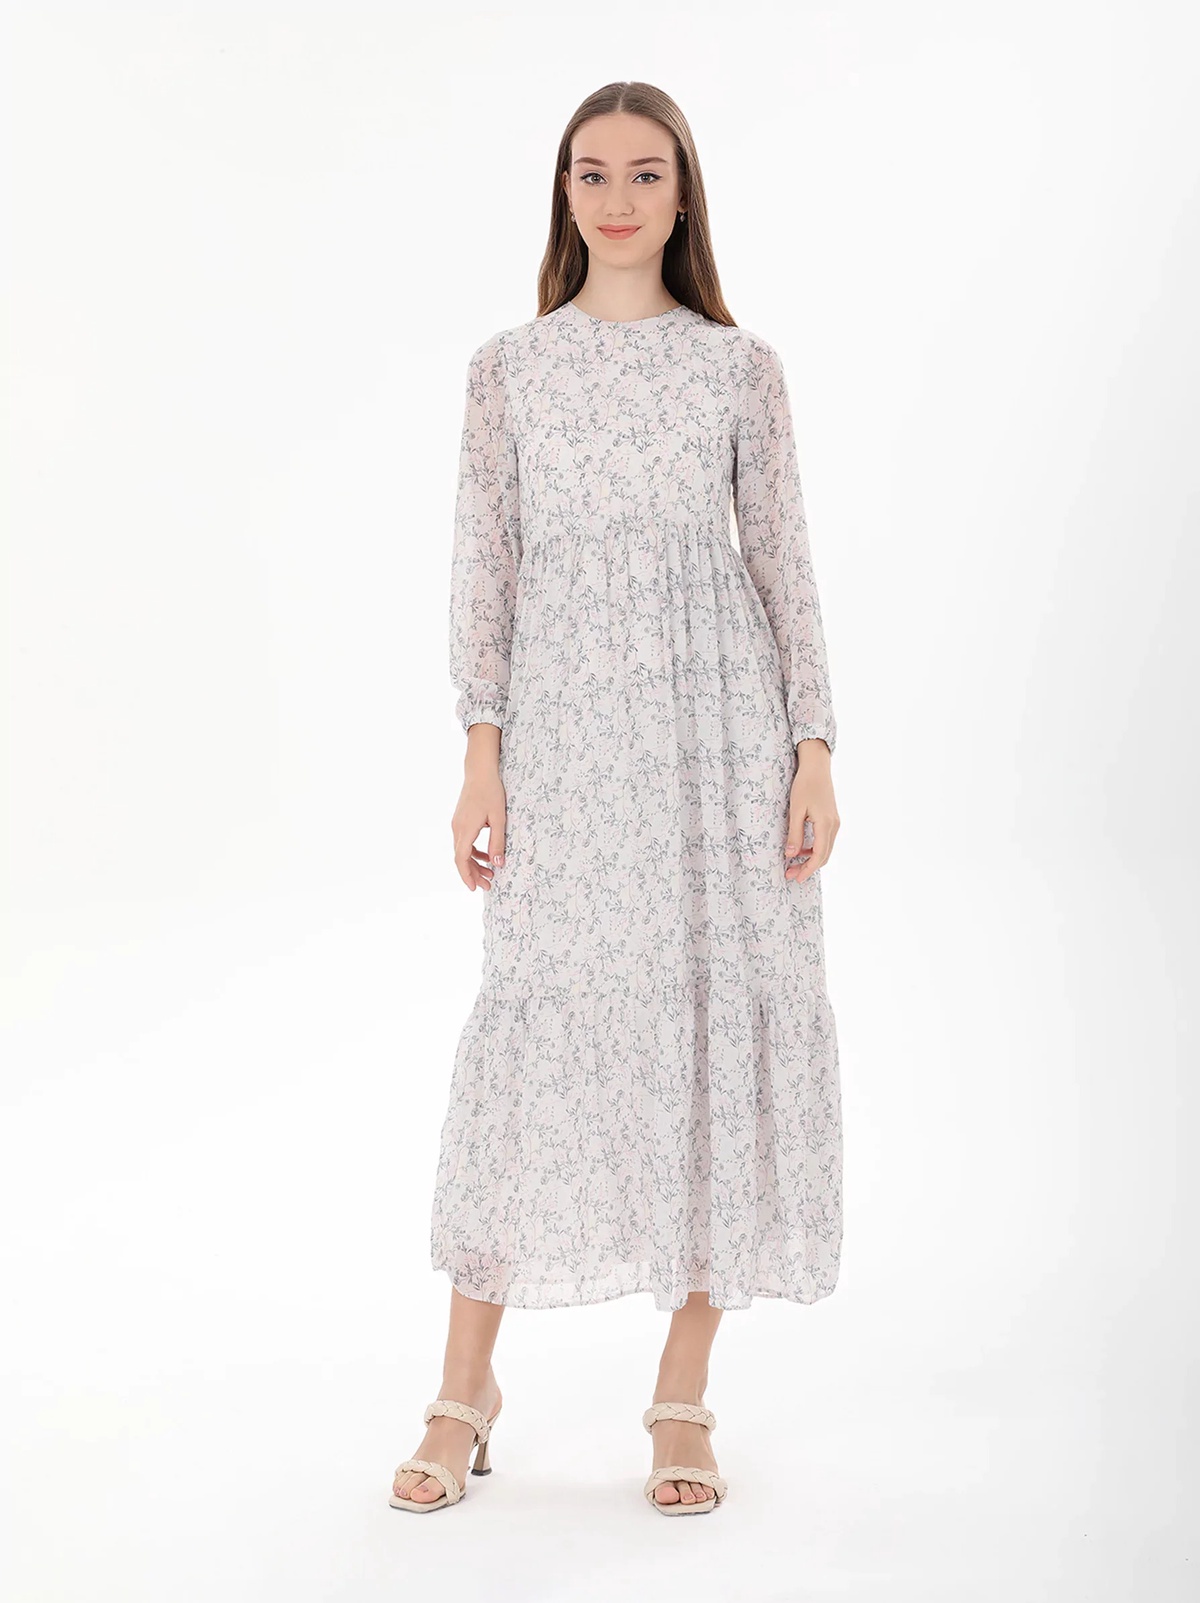 Modest Floral Dresses for Travel: Packing Tips and Outfit Ideas